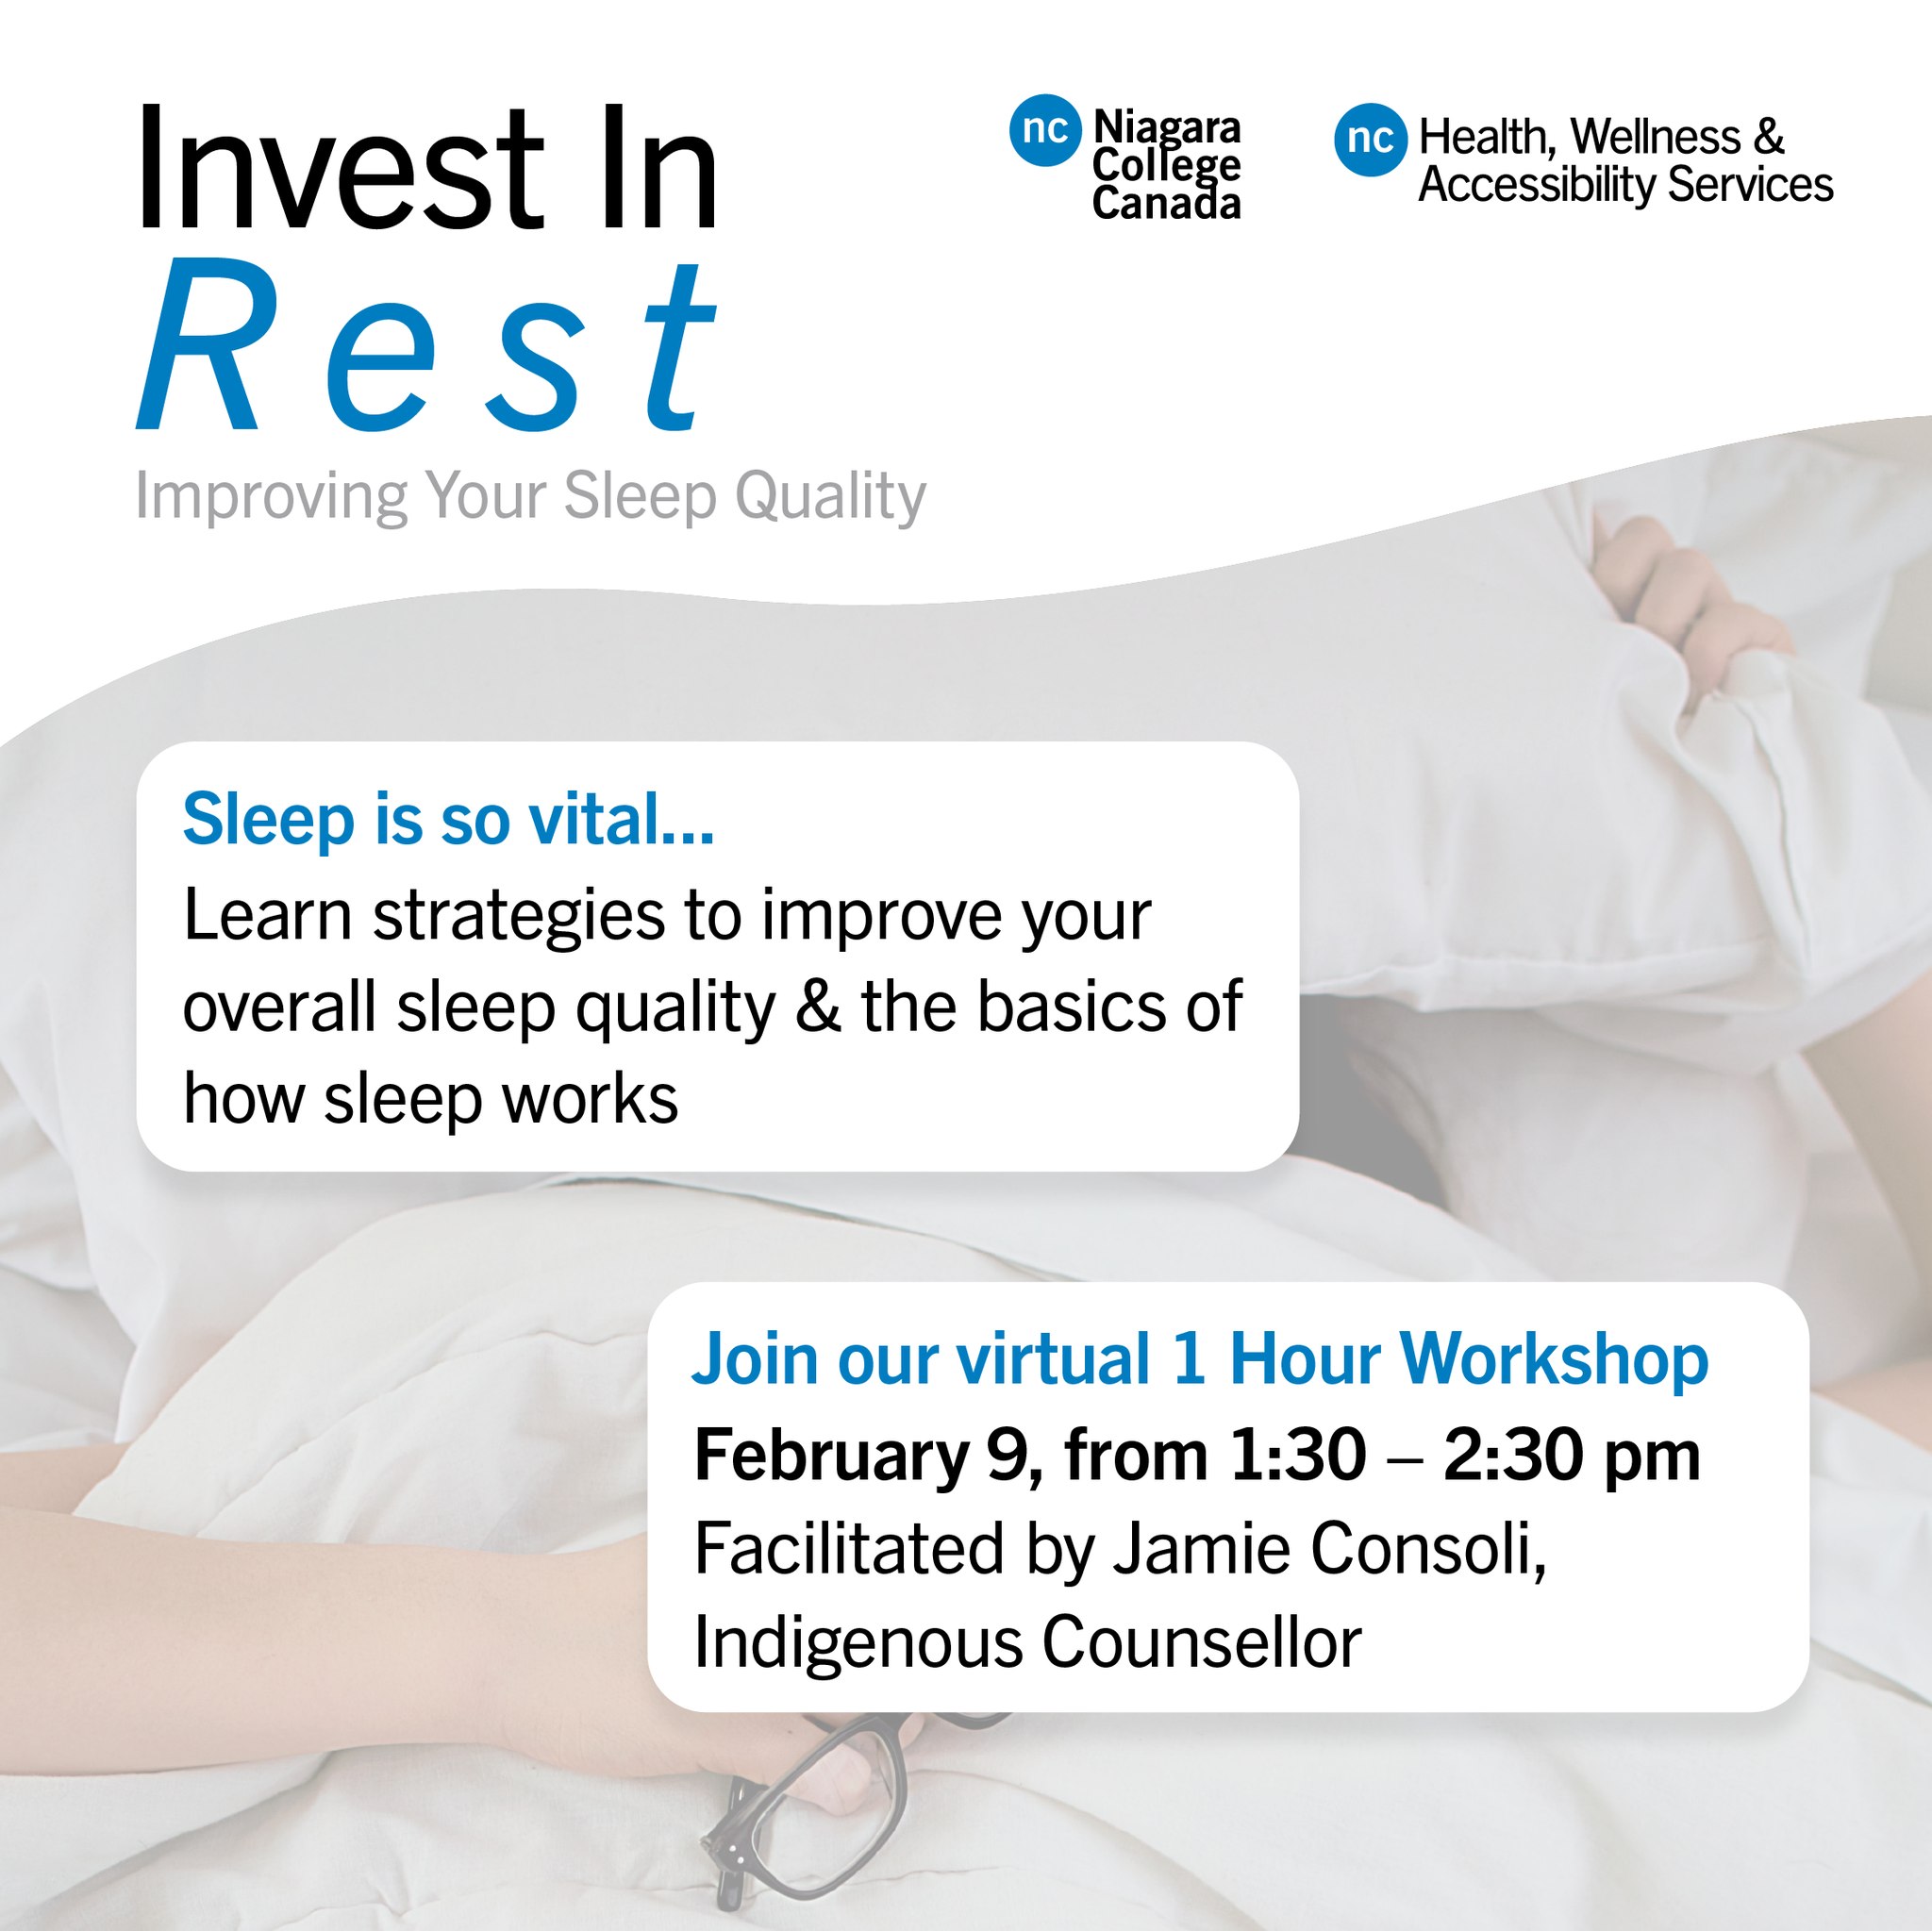 Advertisement for Invest in Rest workshop for students - example of image with text